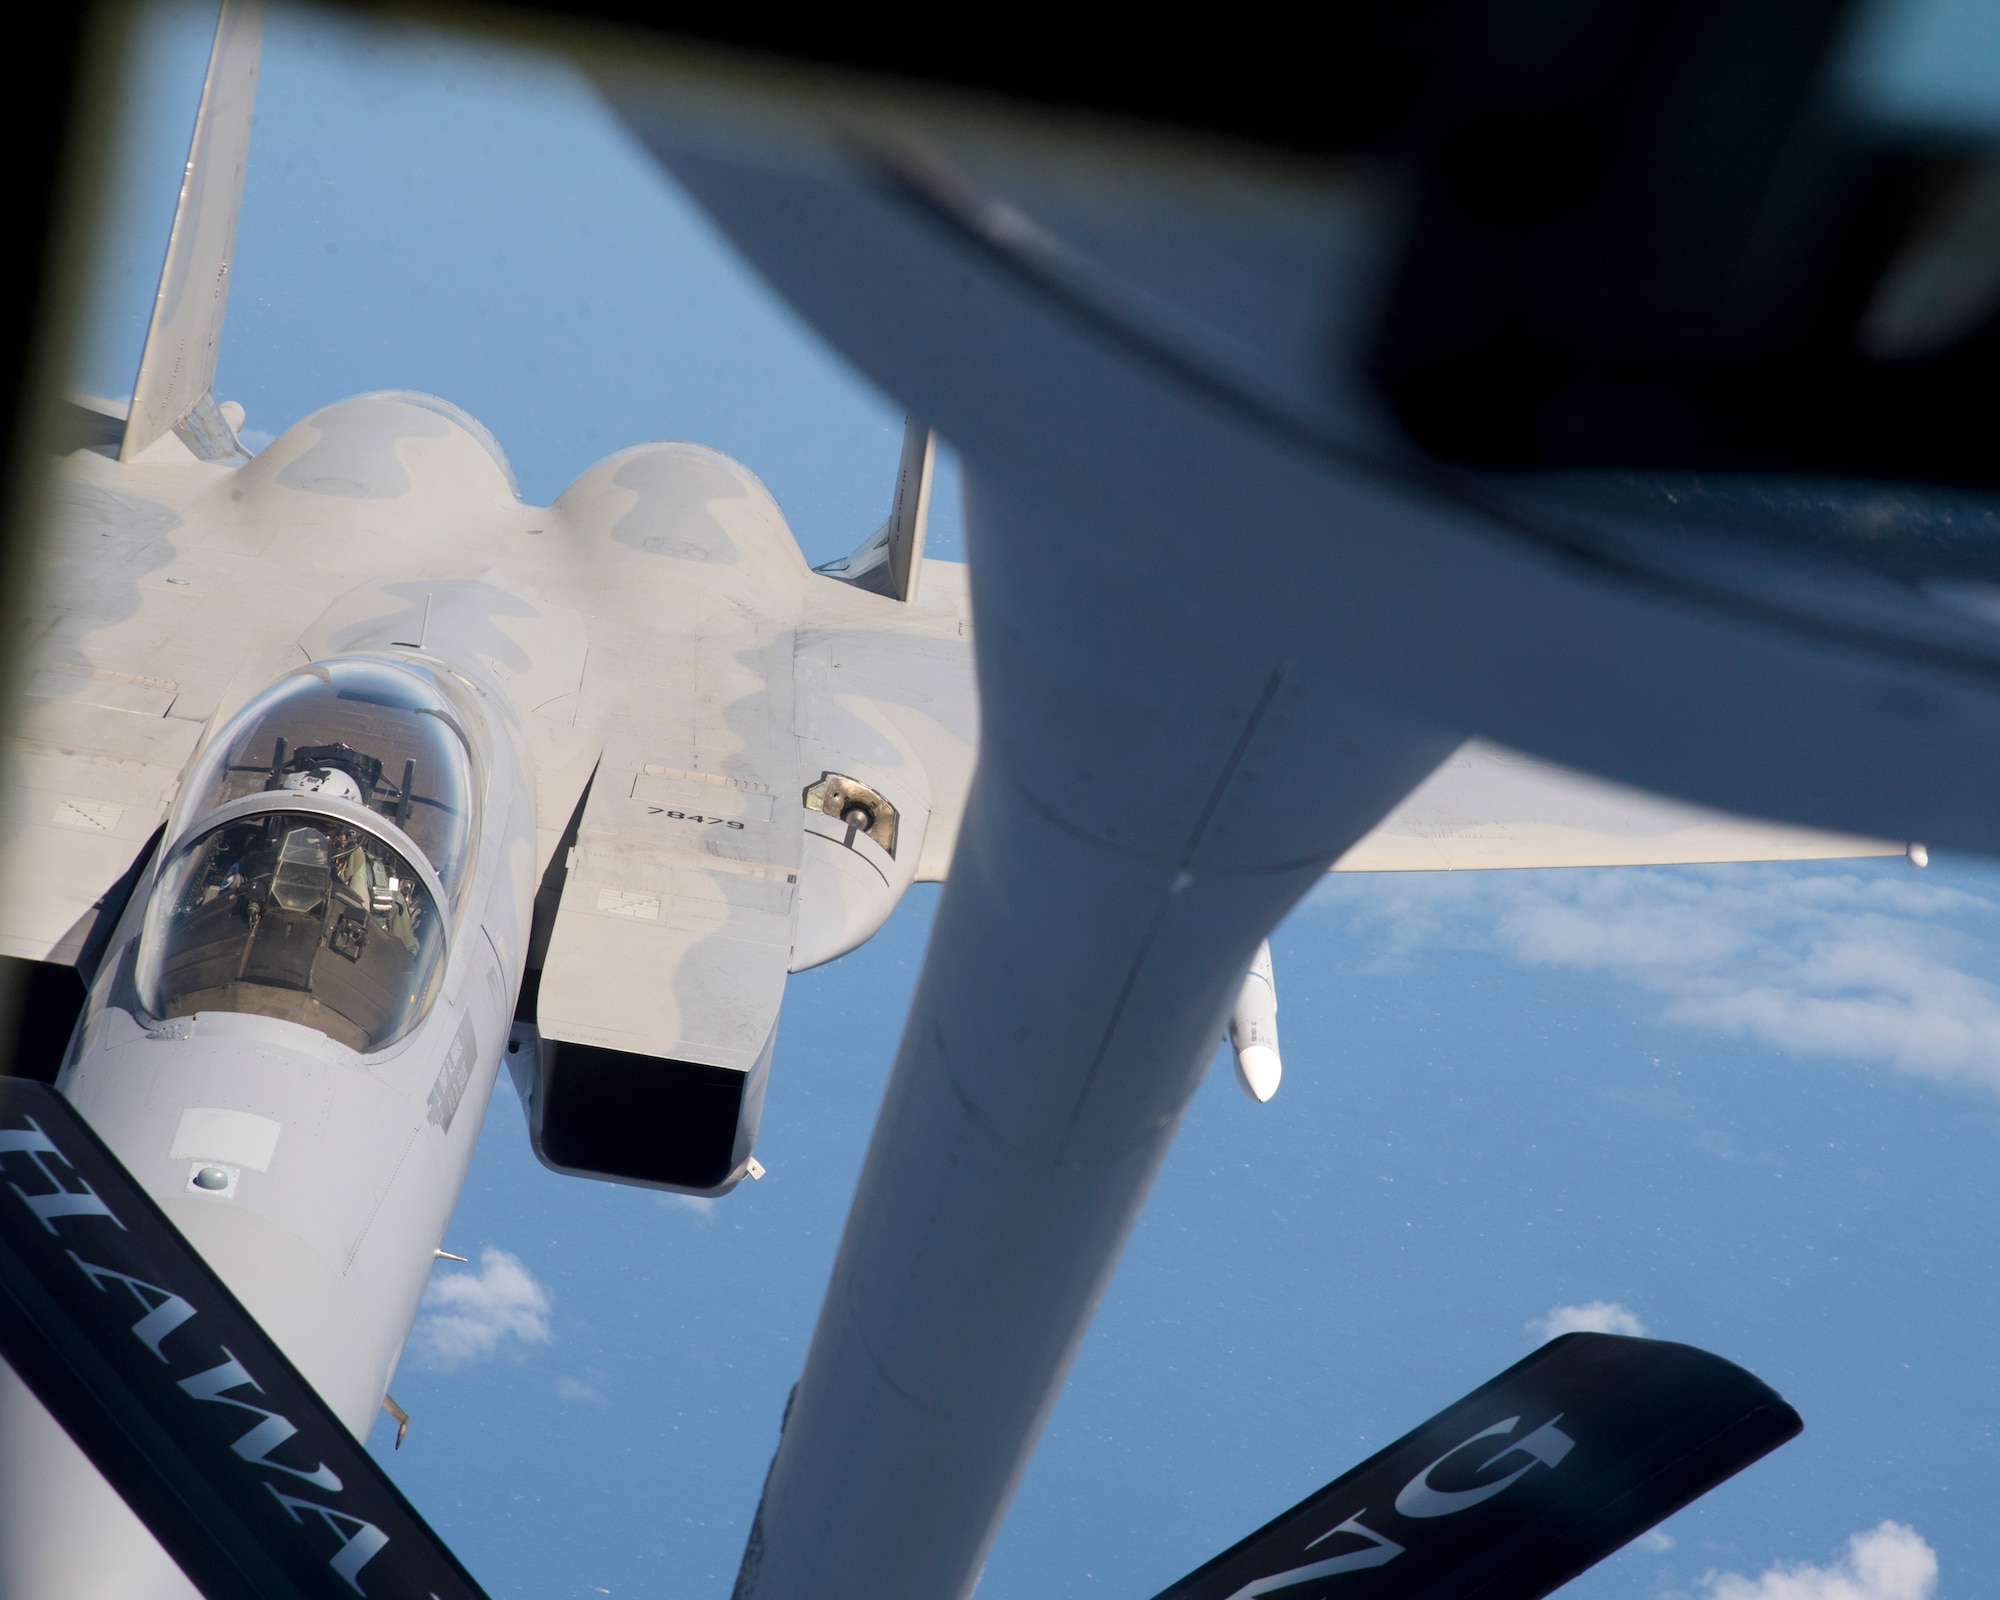 A U.S. Air Force F-15 Strike Eagle from the 142nd Fighter Wing, Oregon Air National Guard, prepares to receive fuel during an in-air refueling  from a KC-135R Stratotanker from the 96th Air Refueling Squadron, during the Hawaii Air National Guard’s exercise Sentry Aloha over Hawaii, March. 5, 2015. This is second large-scale “Sentry Aloha” fighter exercise in 2015 hosting 45 aircraft and more than 1,000 servicemen from seven states. (U.S. Air Force photo by Tech. Sgt. Aaron Oelrich/Released)